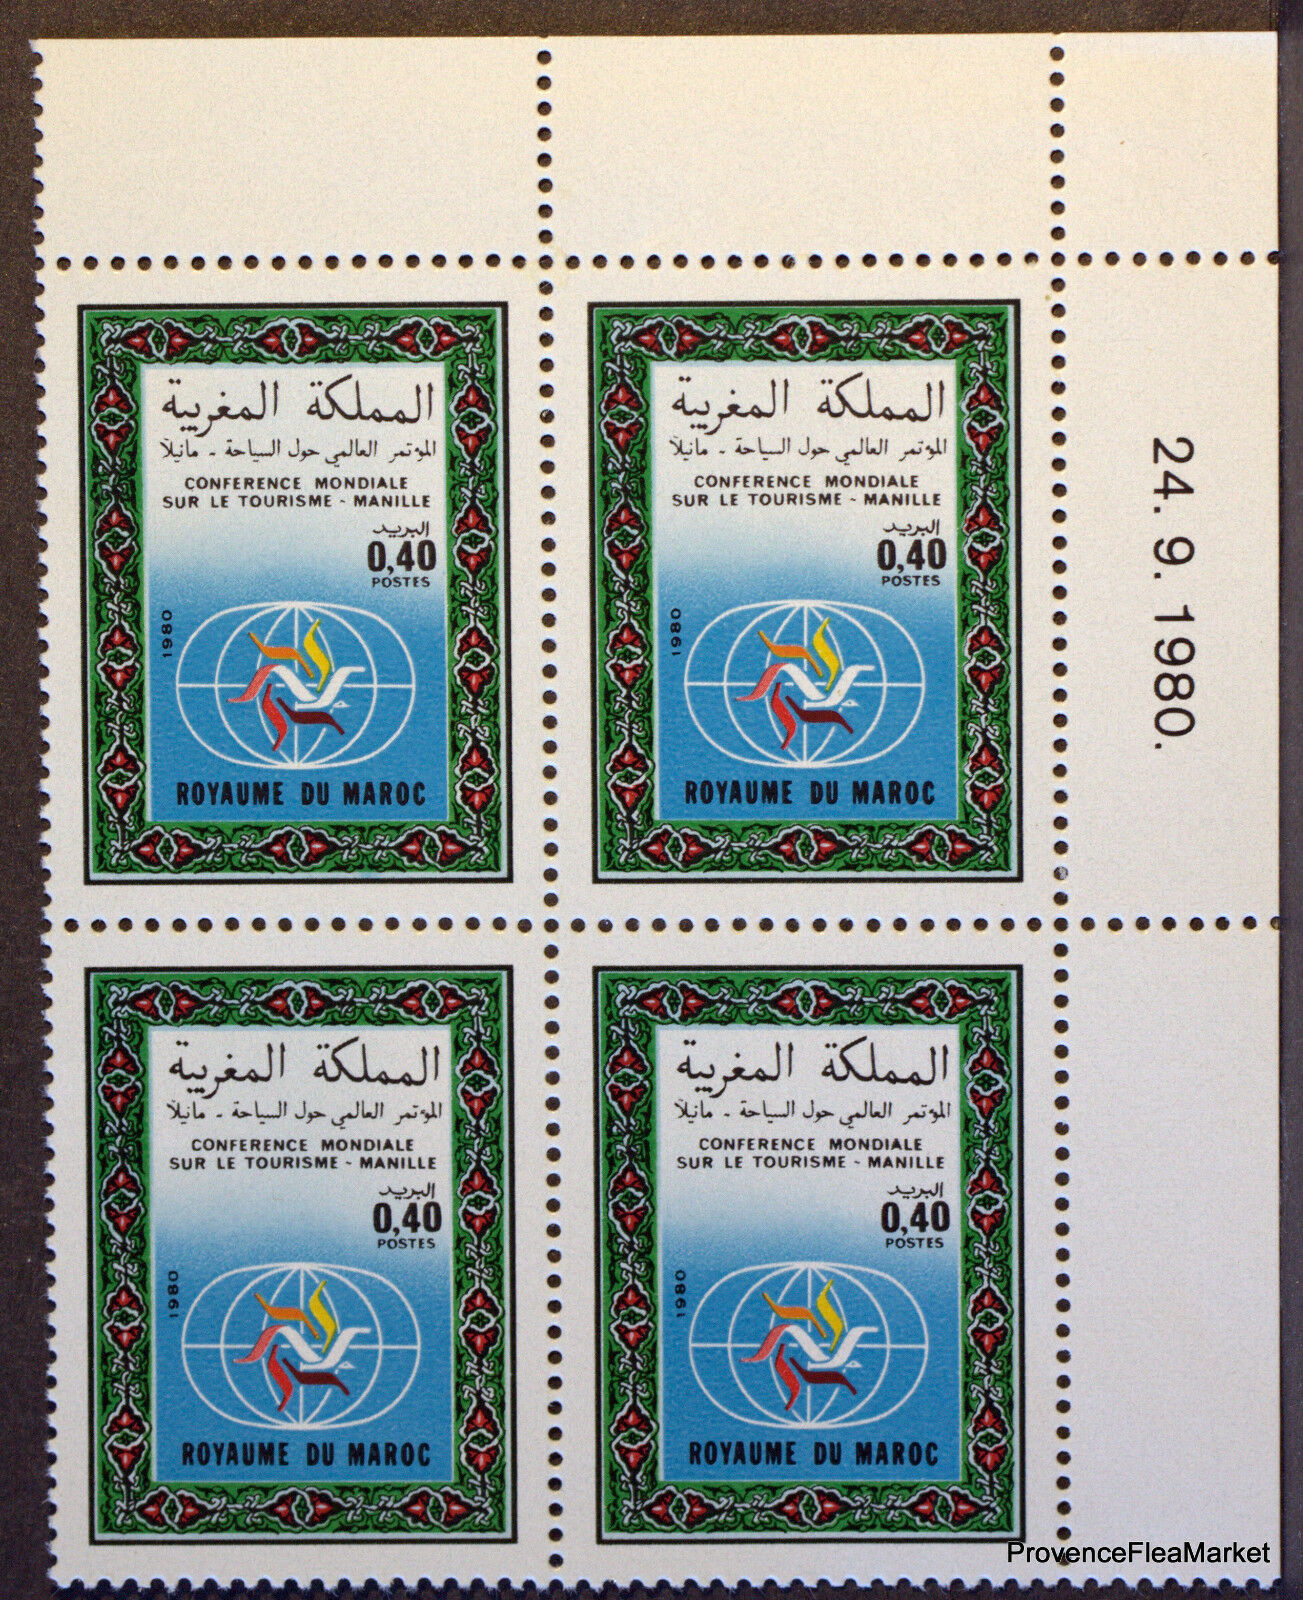 Morocco Morocco Stamps Block Of 4 Date Stamp New No Hinges Mnh Acab9